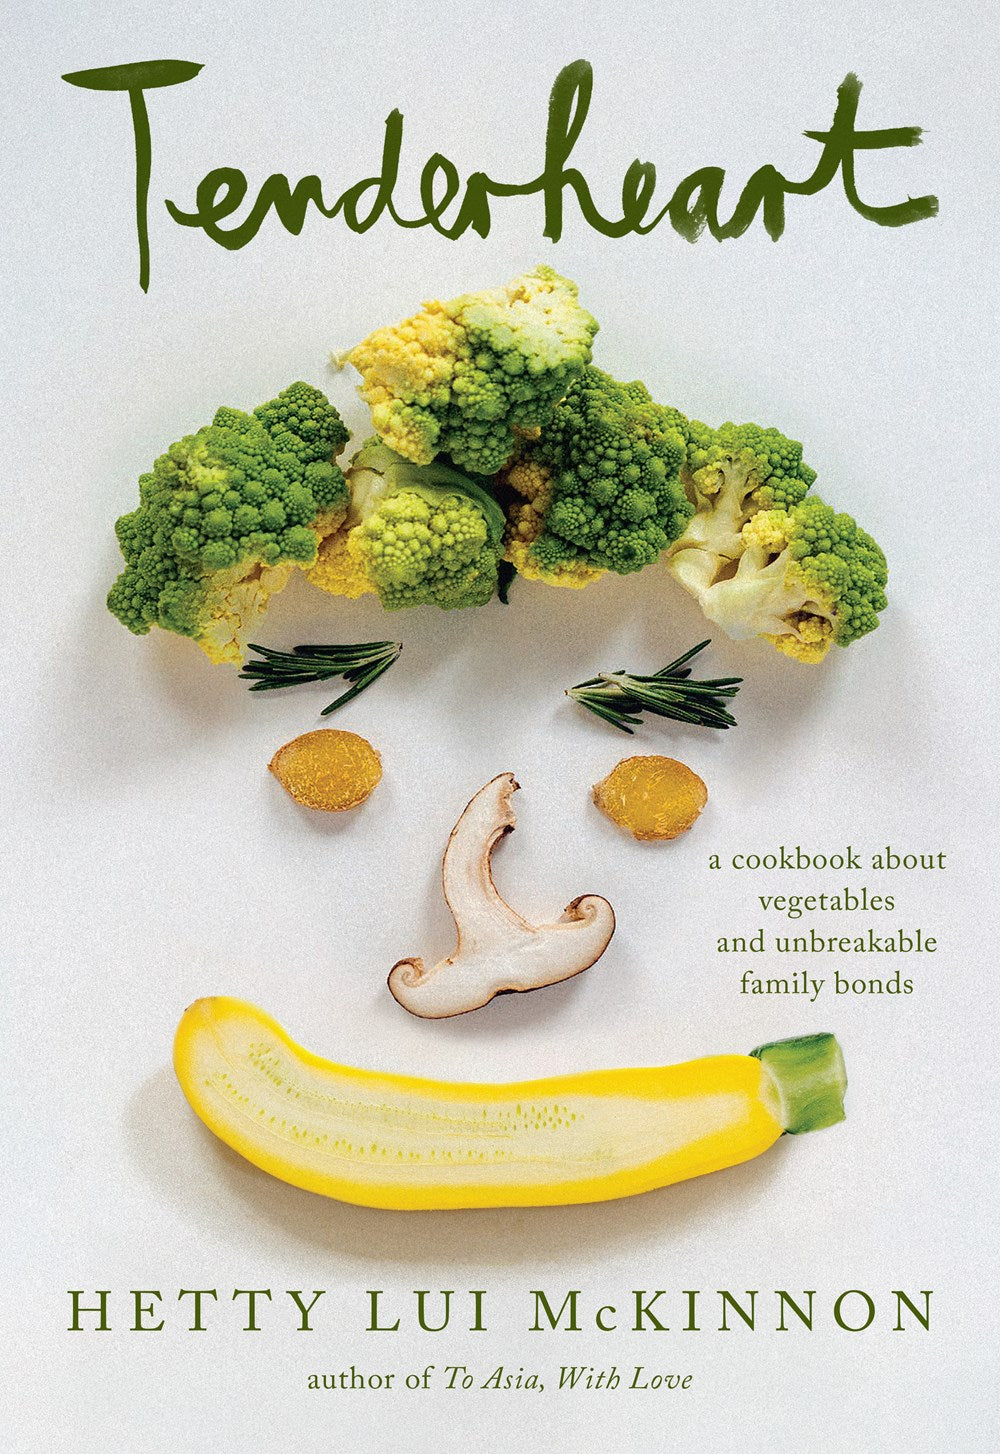 Tenderheart: A Cookbook About Vegetables and Unbreakable Family Bonds by Hetty Lui McKinnon (5/30/23)